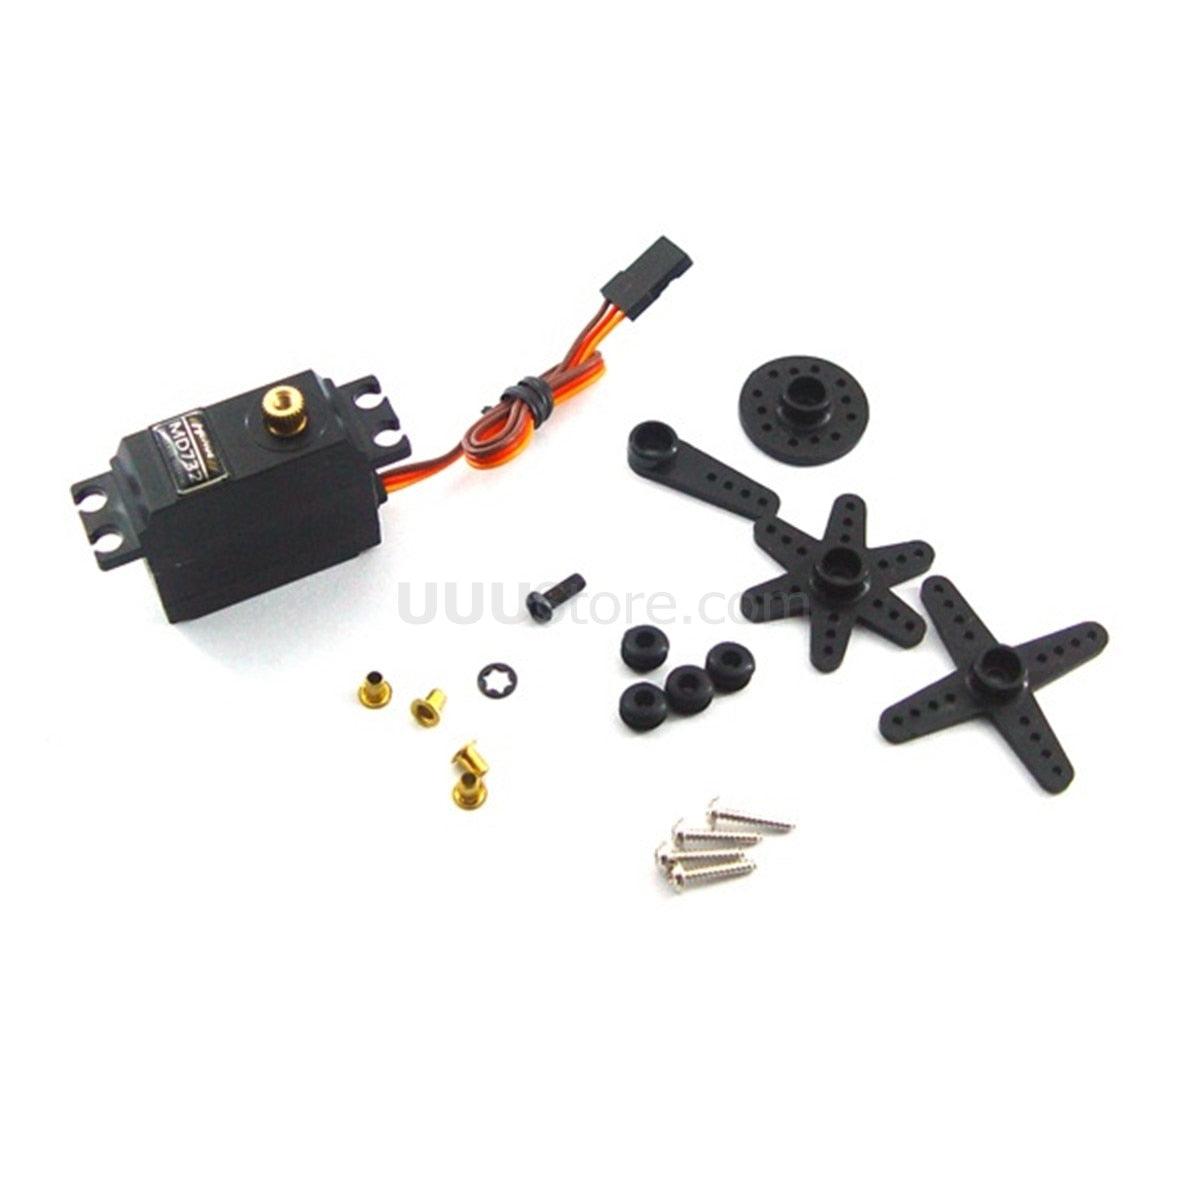 Henge MD732 Metal Gear Digital Lock Tail Servo trex 450 500 Helicopter and PTZ , UP s9257 - RCDrone